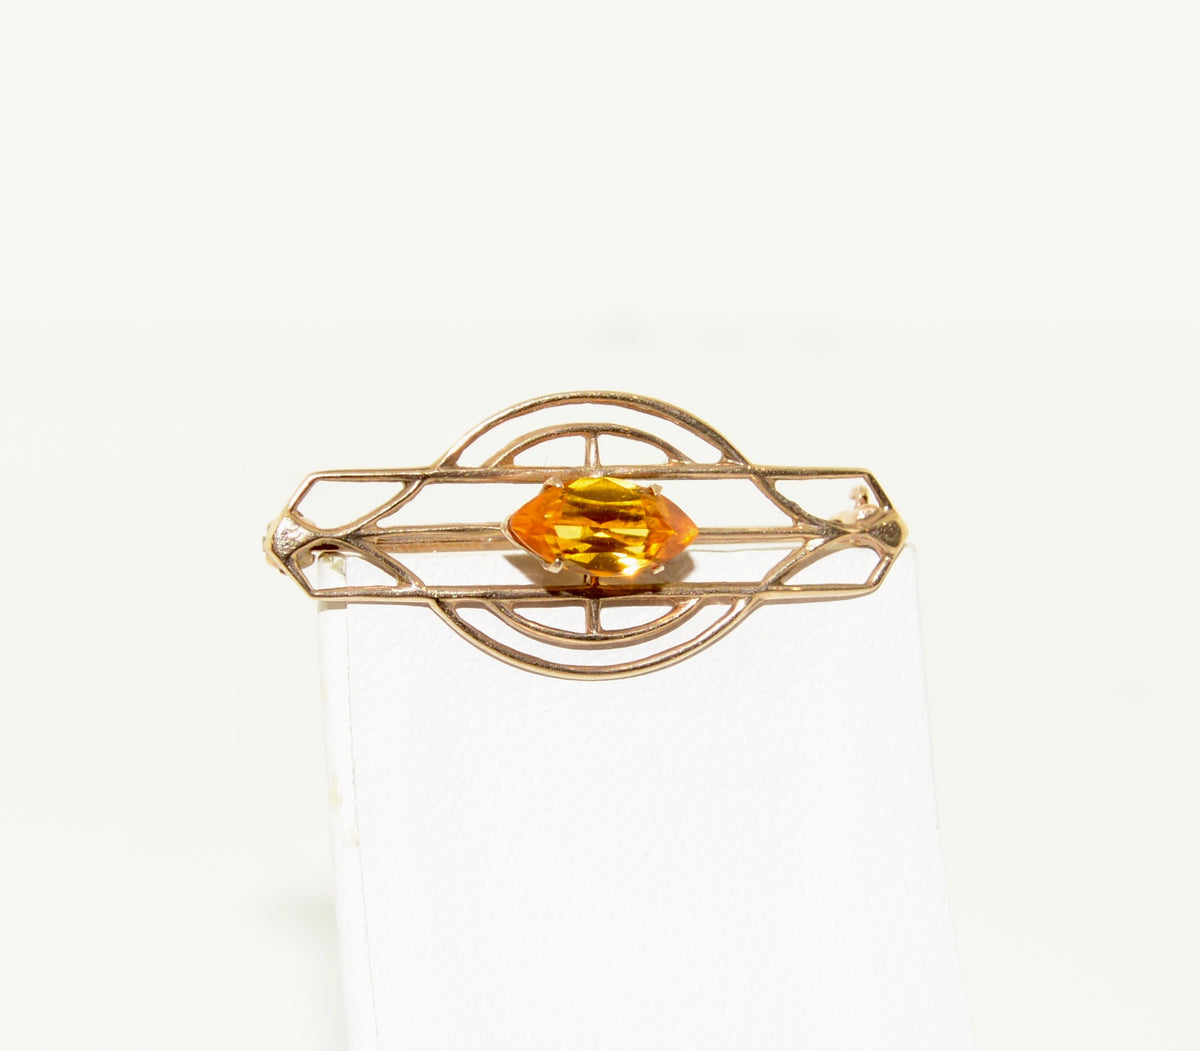 10K Marquise Cut Citrine and Gold Geometric Brooch